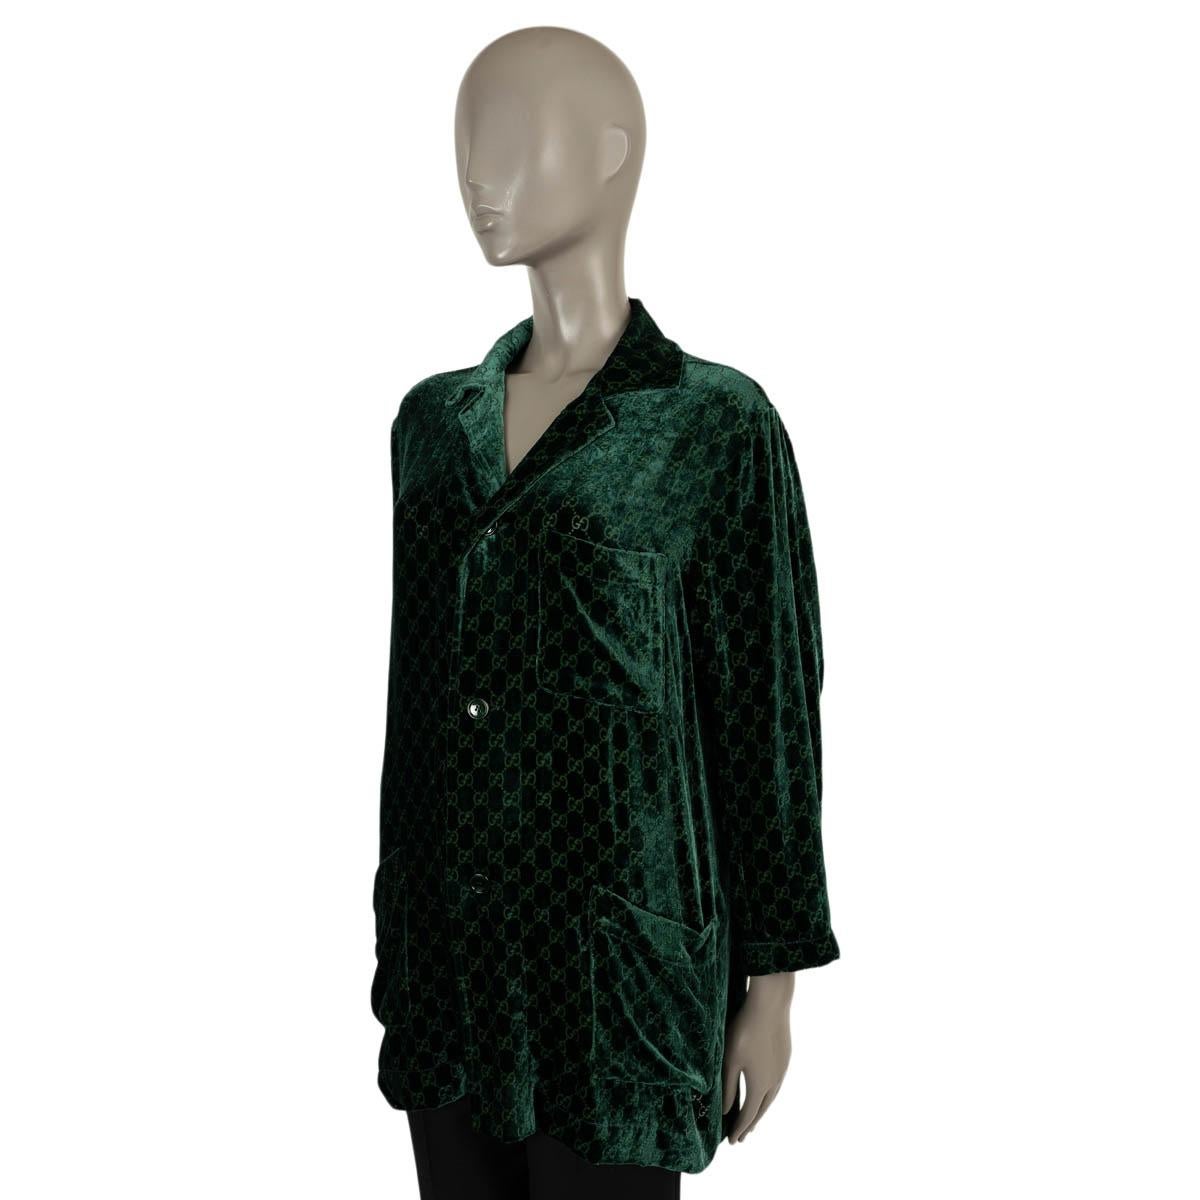 100% authentic Gucci GG Devoré velvet button-up shirt in emerald green viscose (78%) and silk (22%). Features spread collar, a chest pocket and two pockets at the waist. Closes with buttons on the front and is unlined. Has been worried and is in